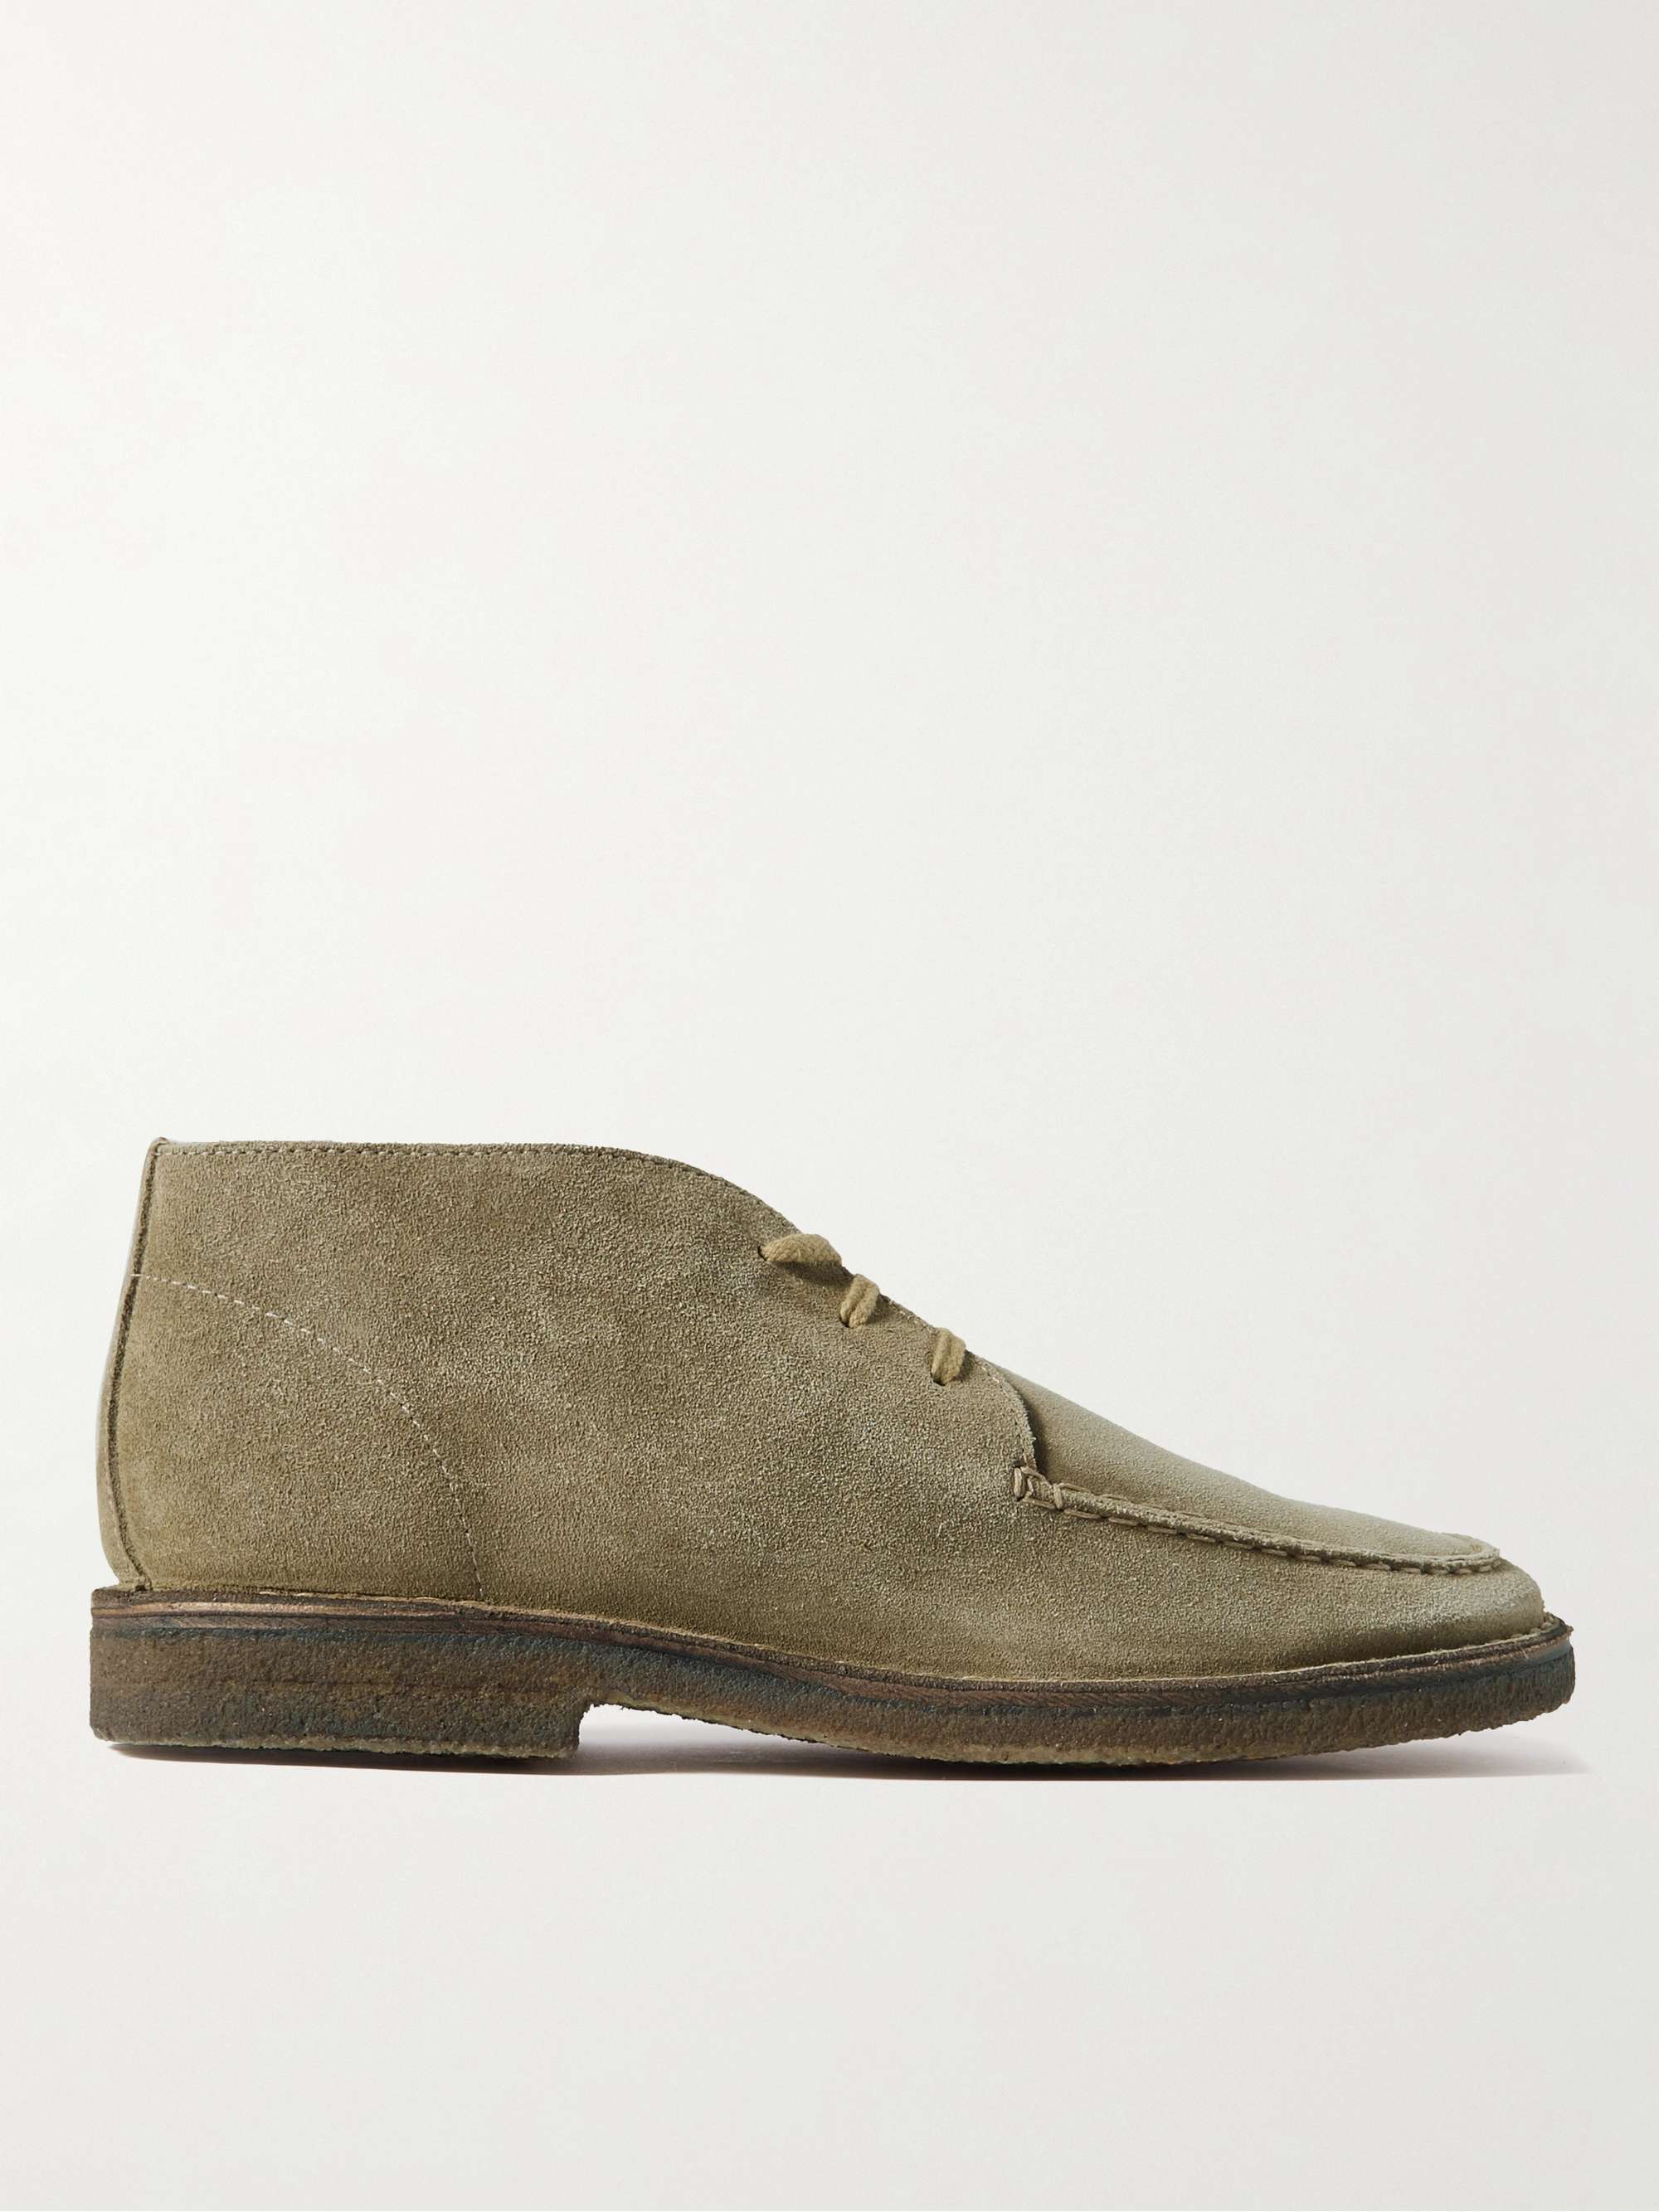 DRAKE'S Crosby Suede Chukka Boots